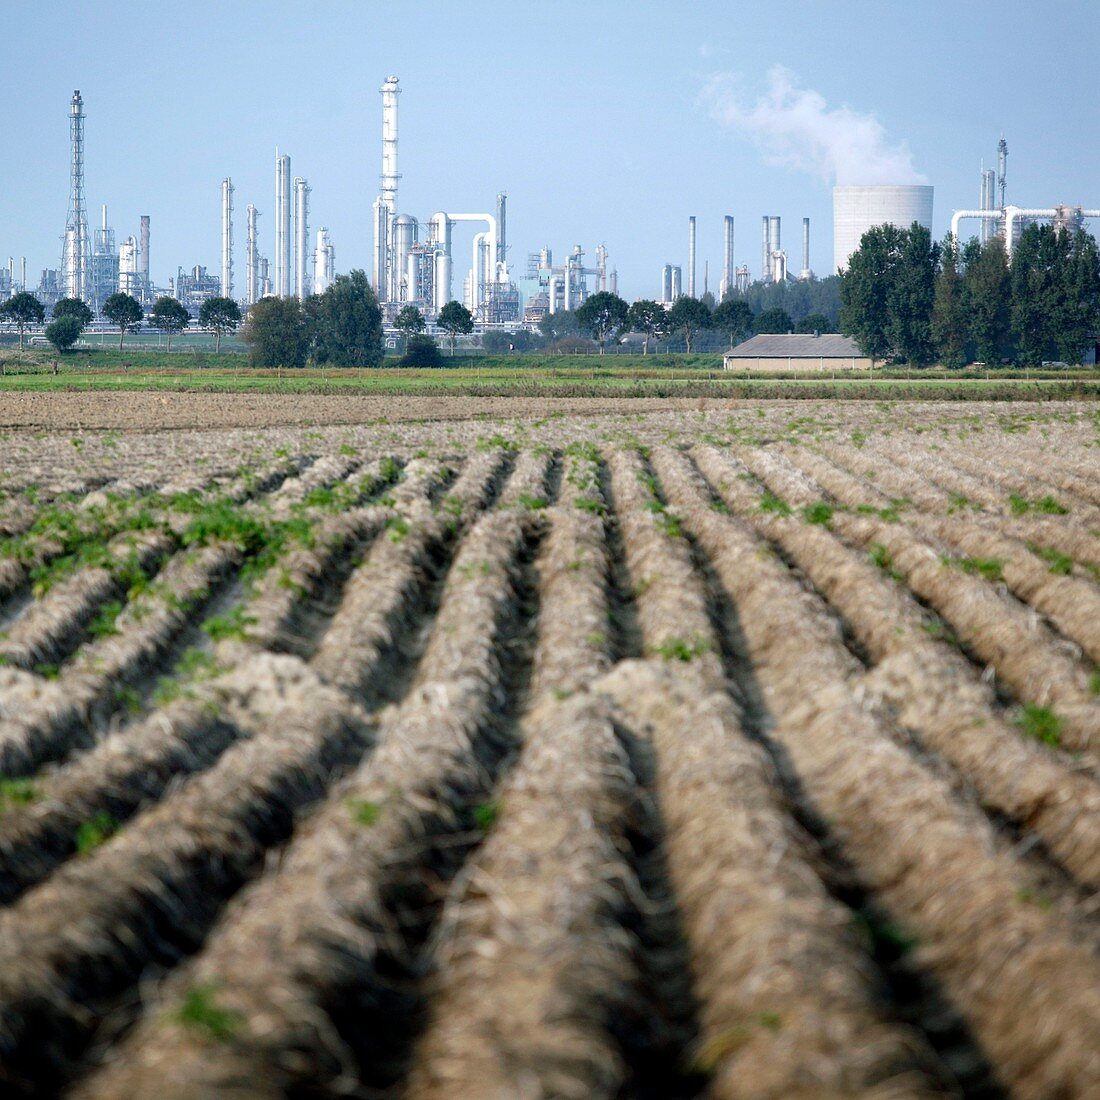 Agriculture next to a chemical plant